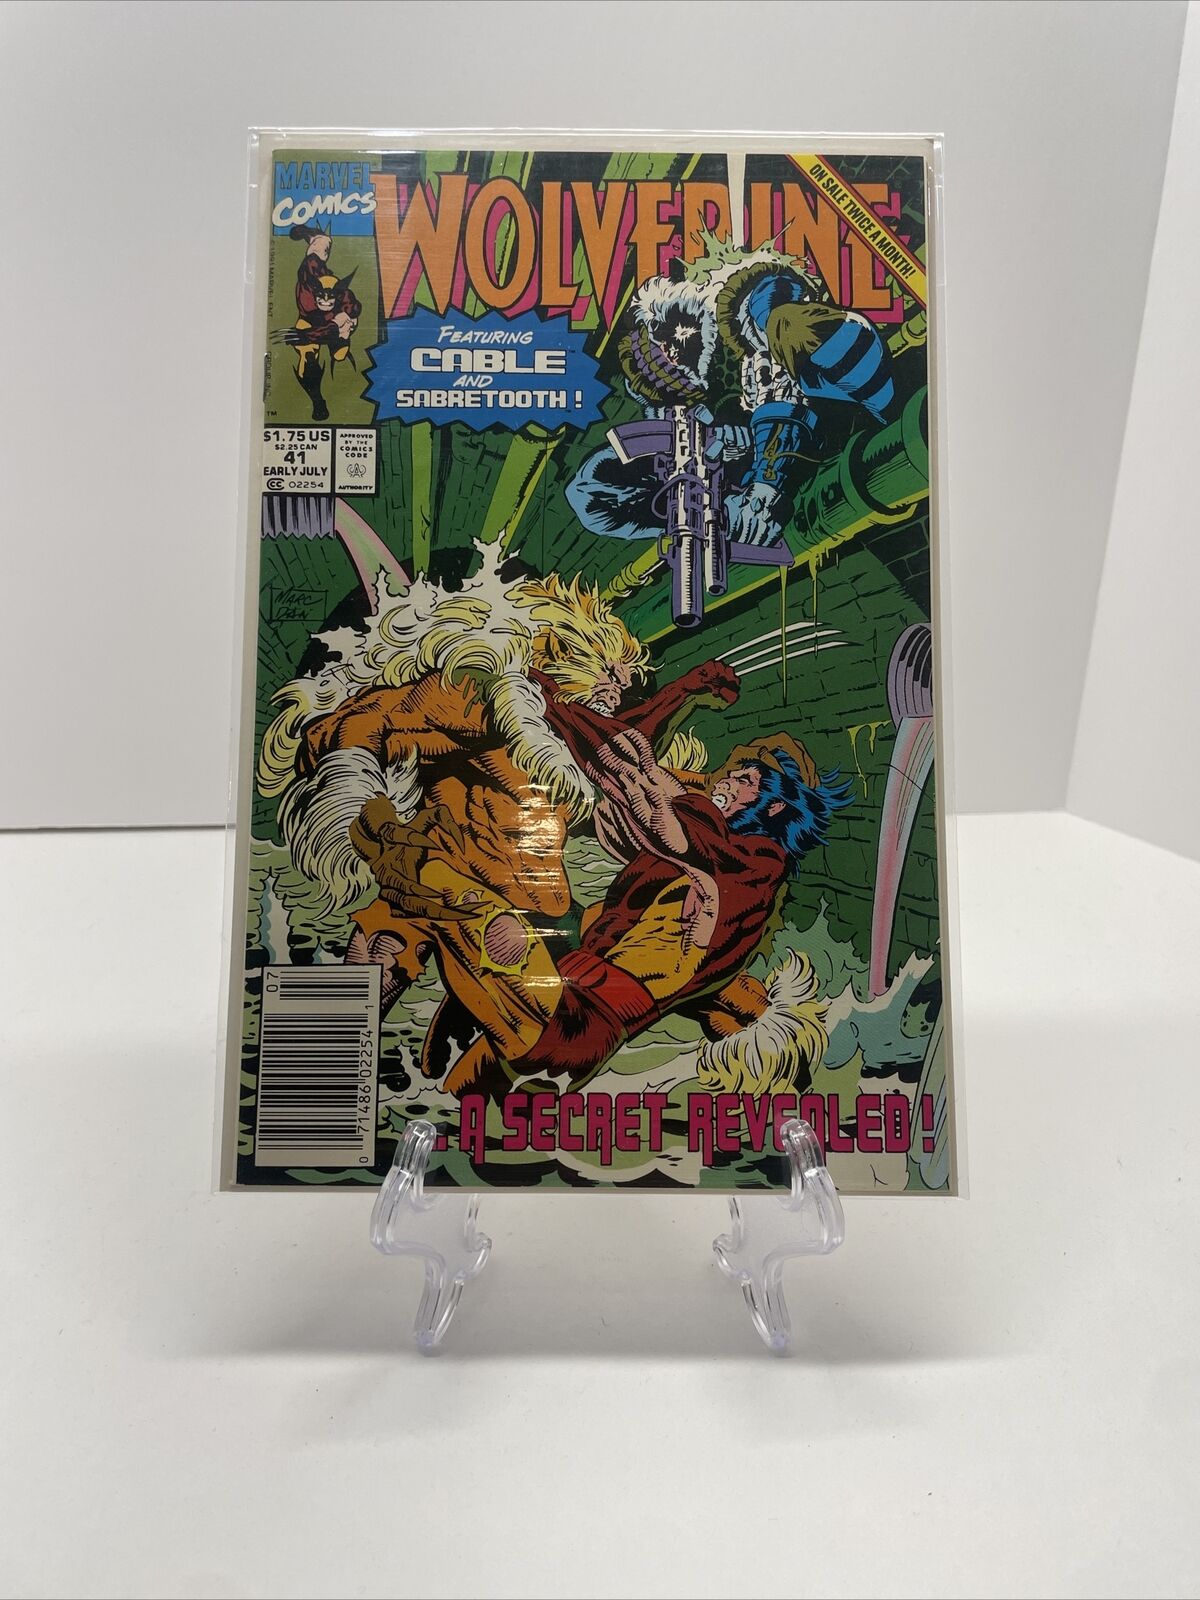 Wolverine #41 July 1991 Newsstand Cover Marvel Comic Book Volume 2